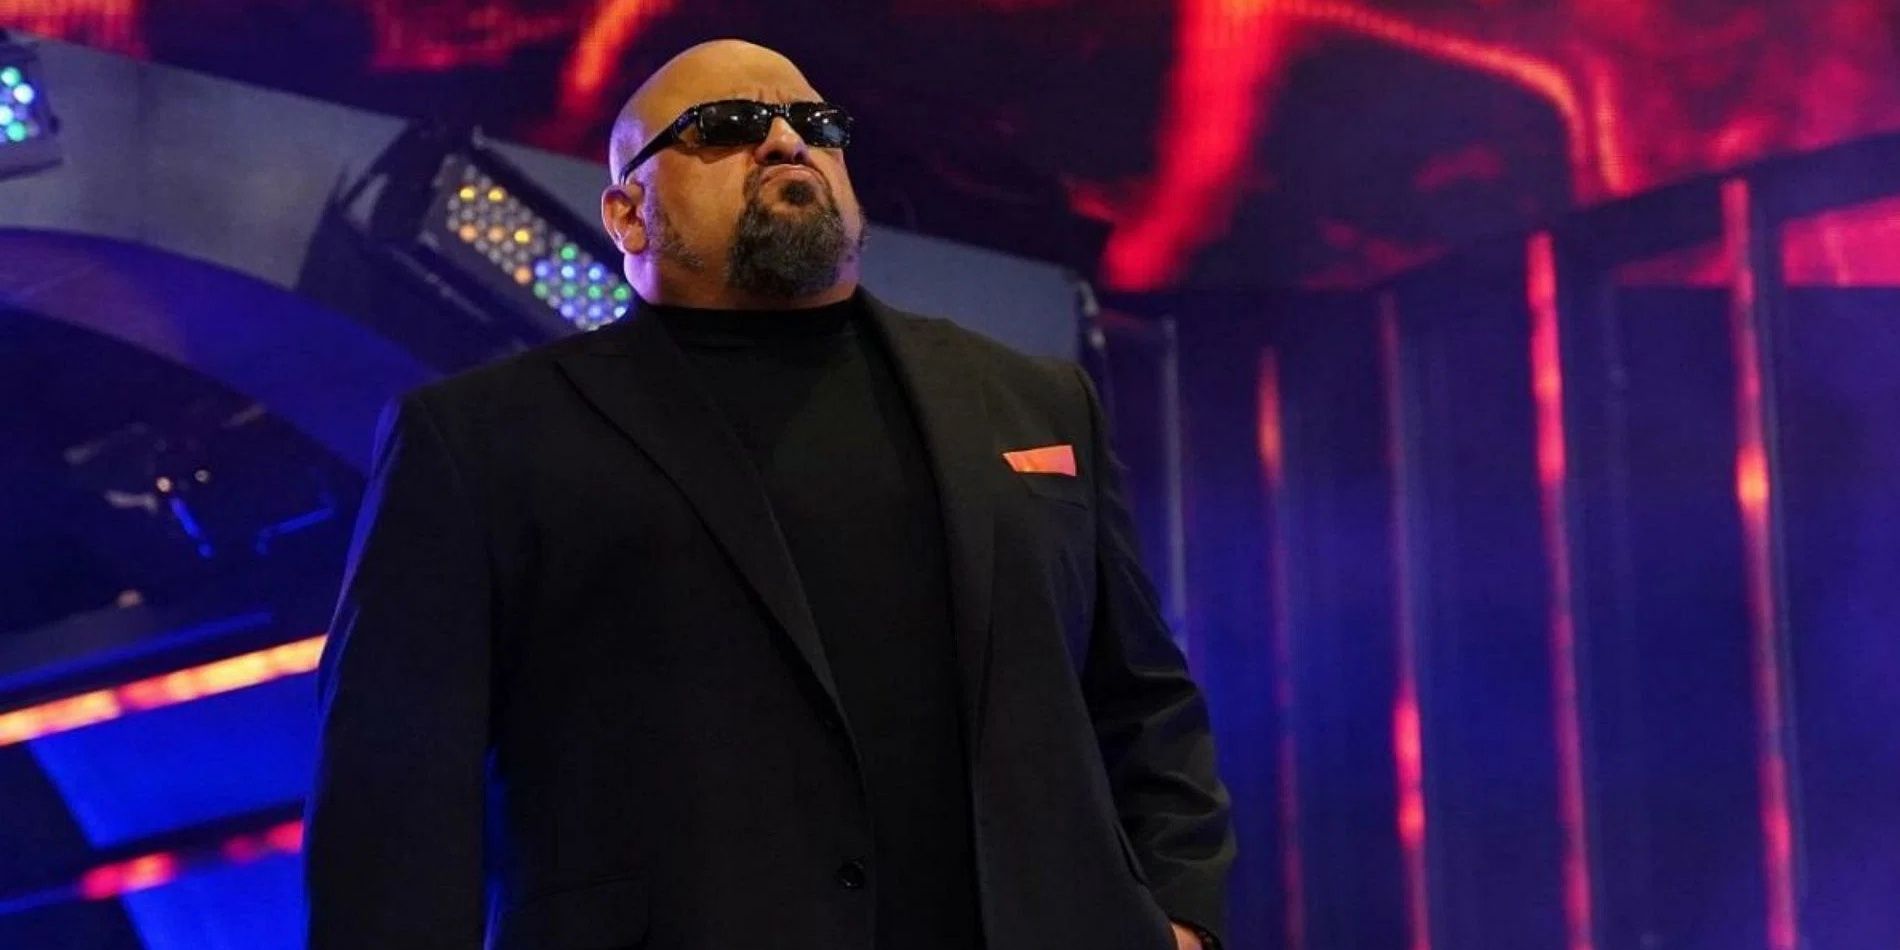 Taz making his entrance in AEW